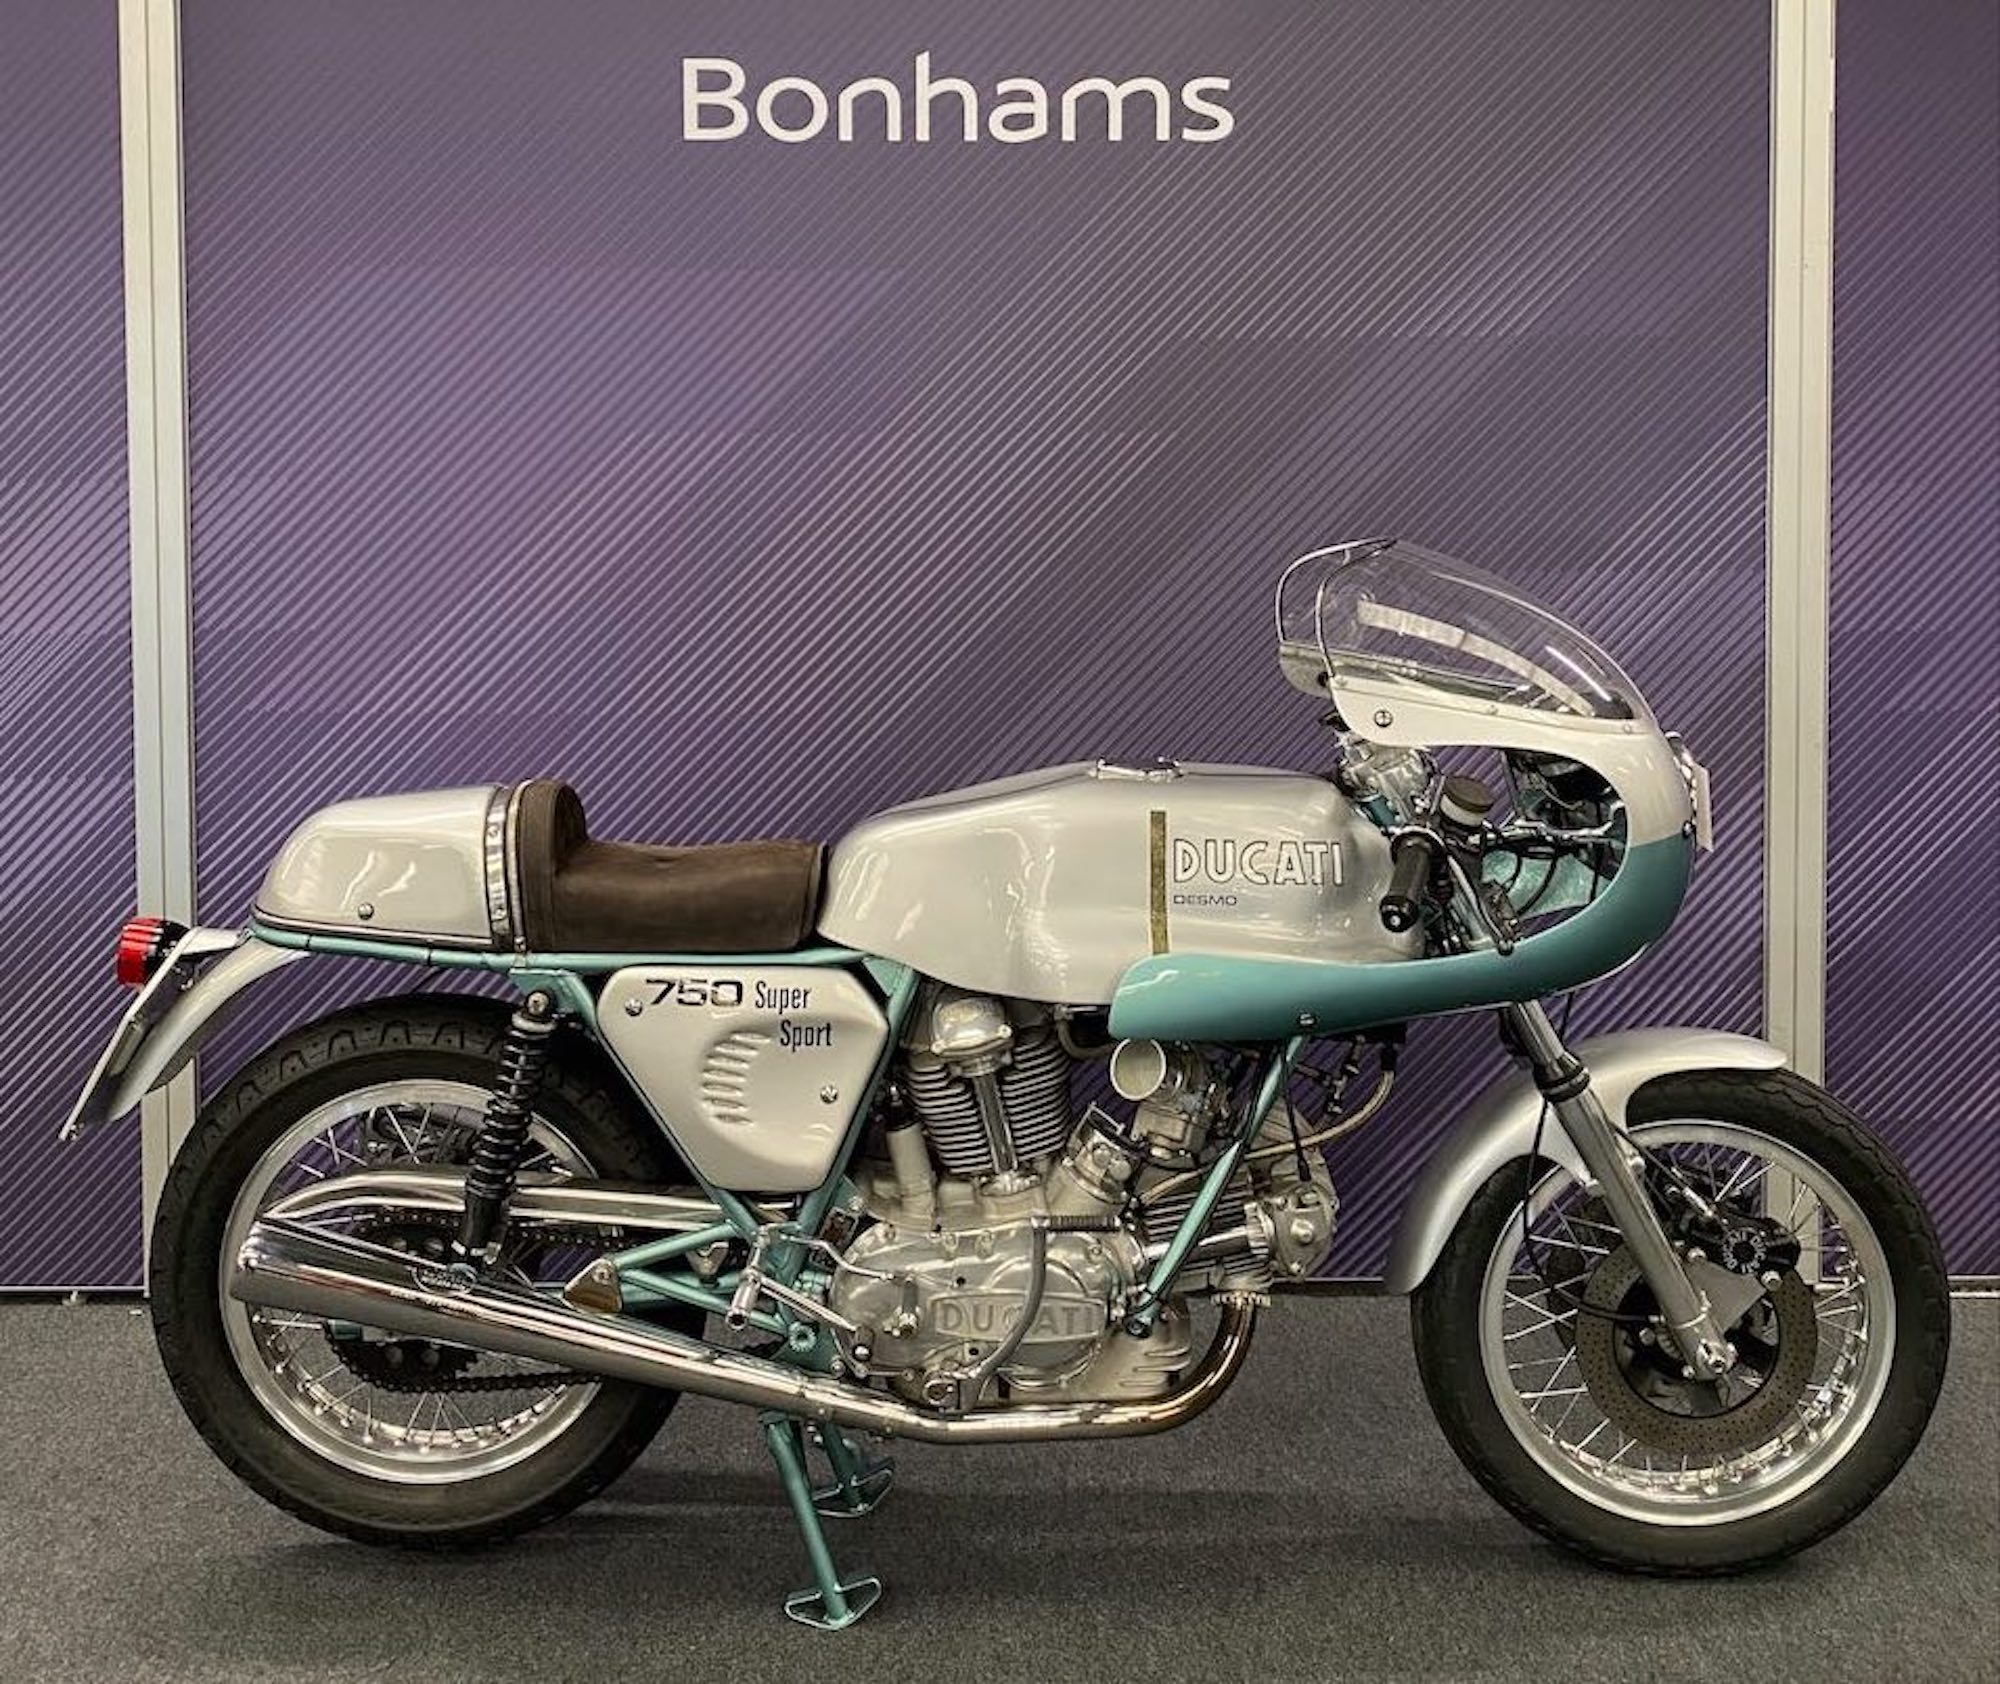 1974 Ducati 750SS, which sold for £172,500. Media sourced from Bonham's press release.